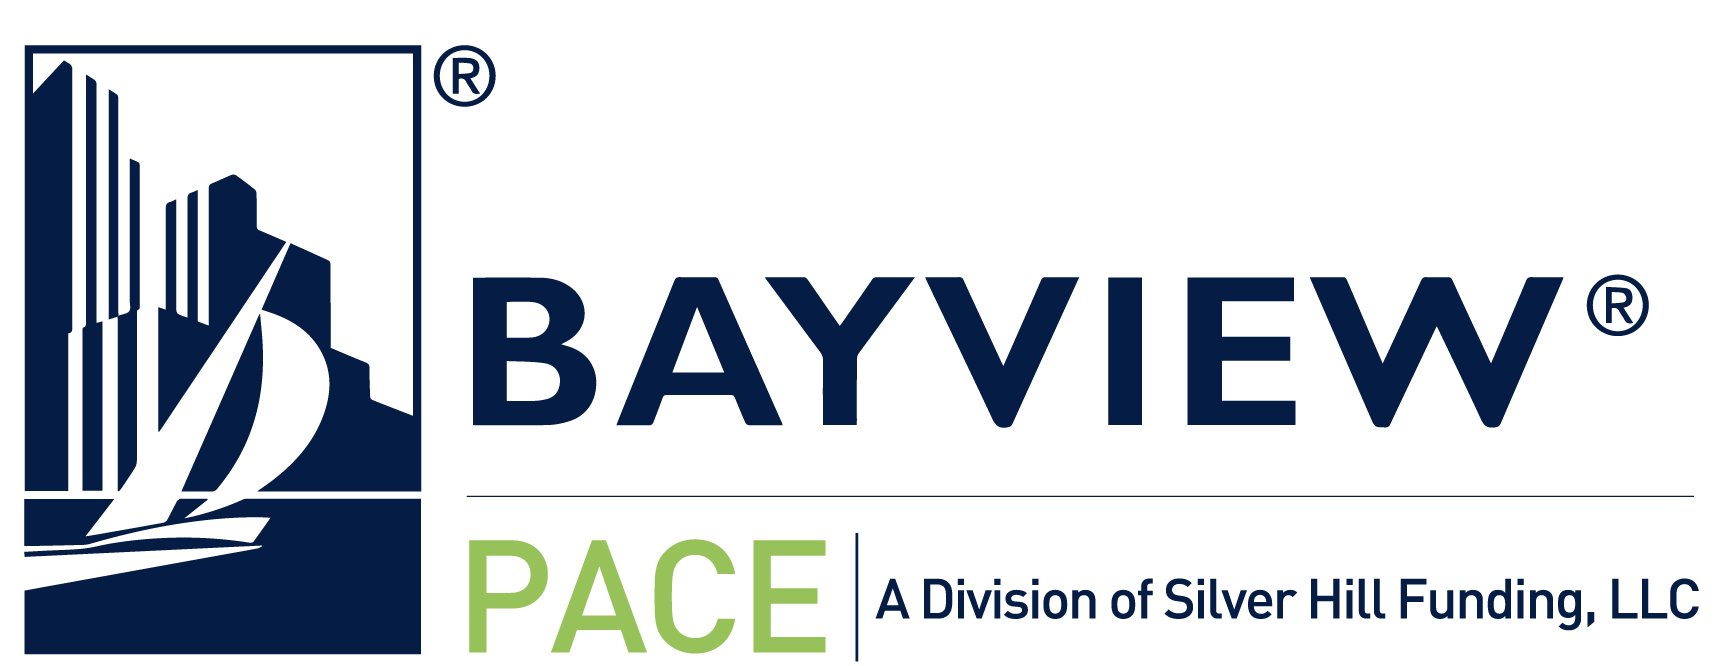 Bayview PACE